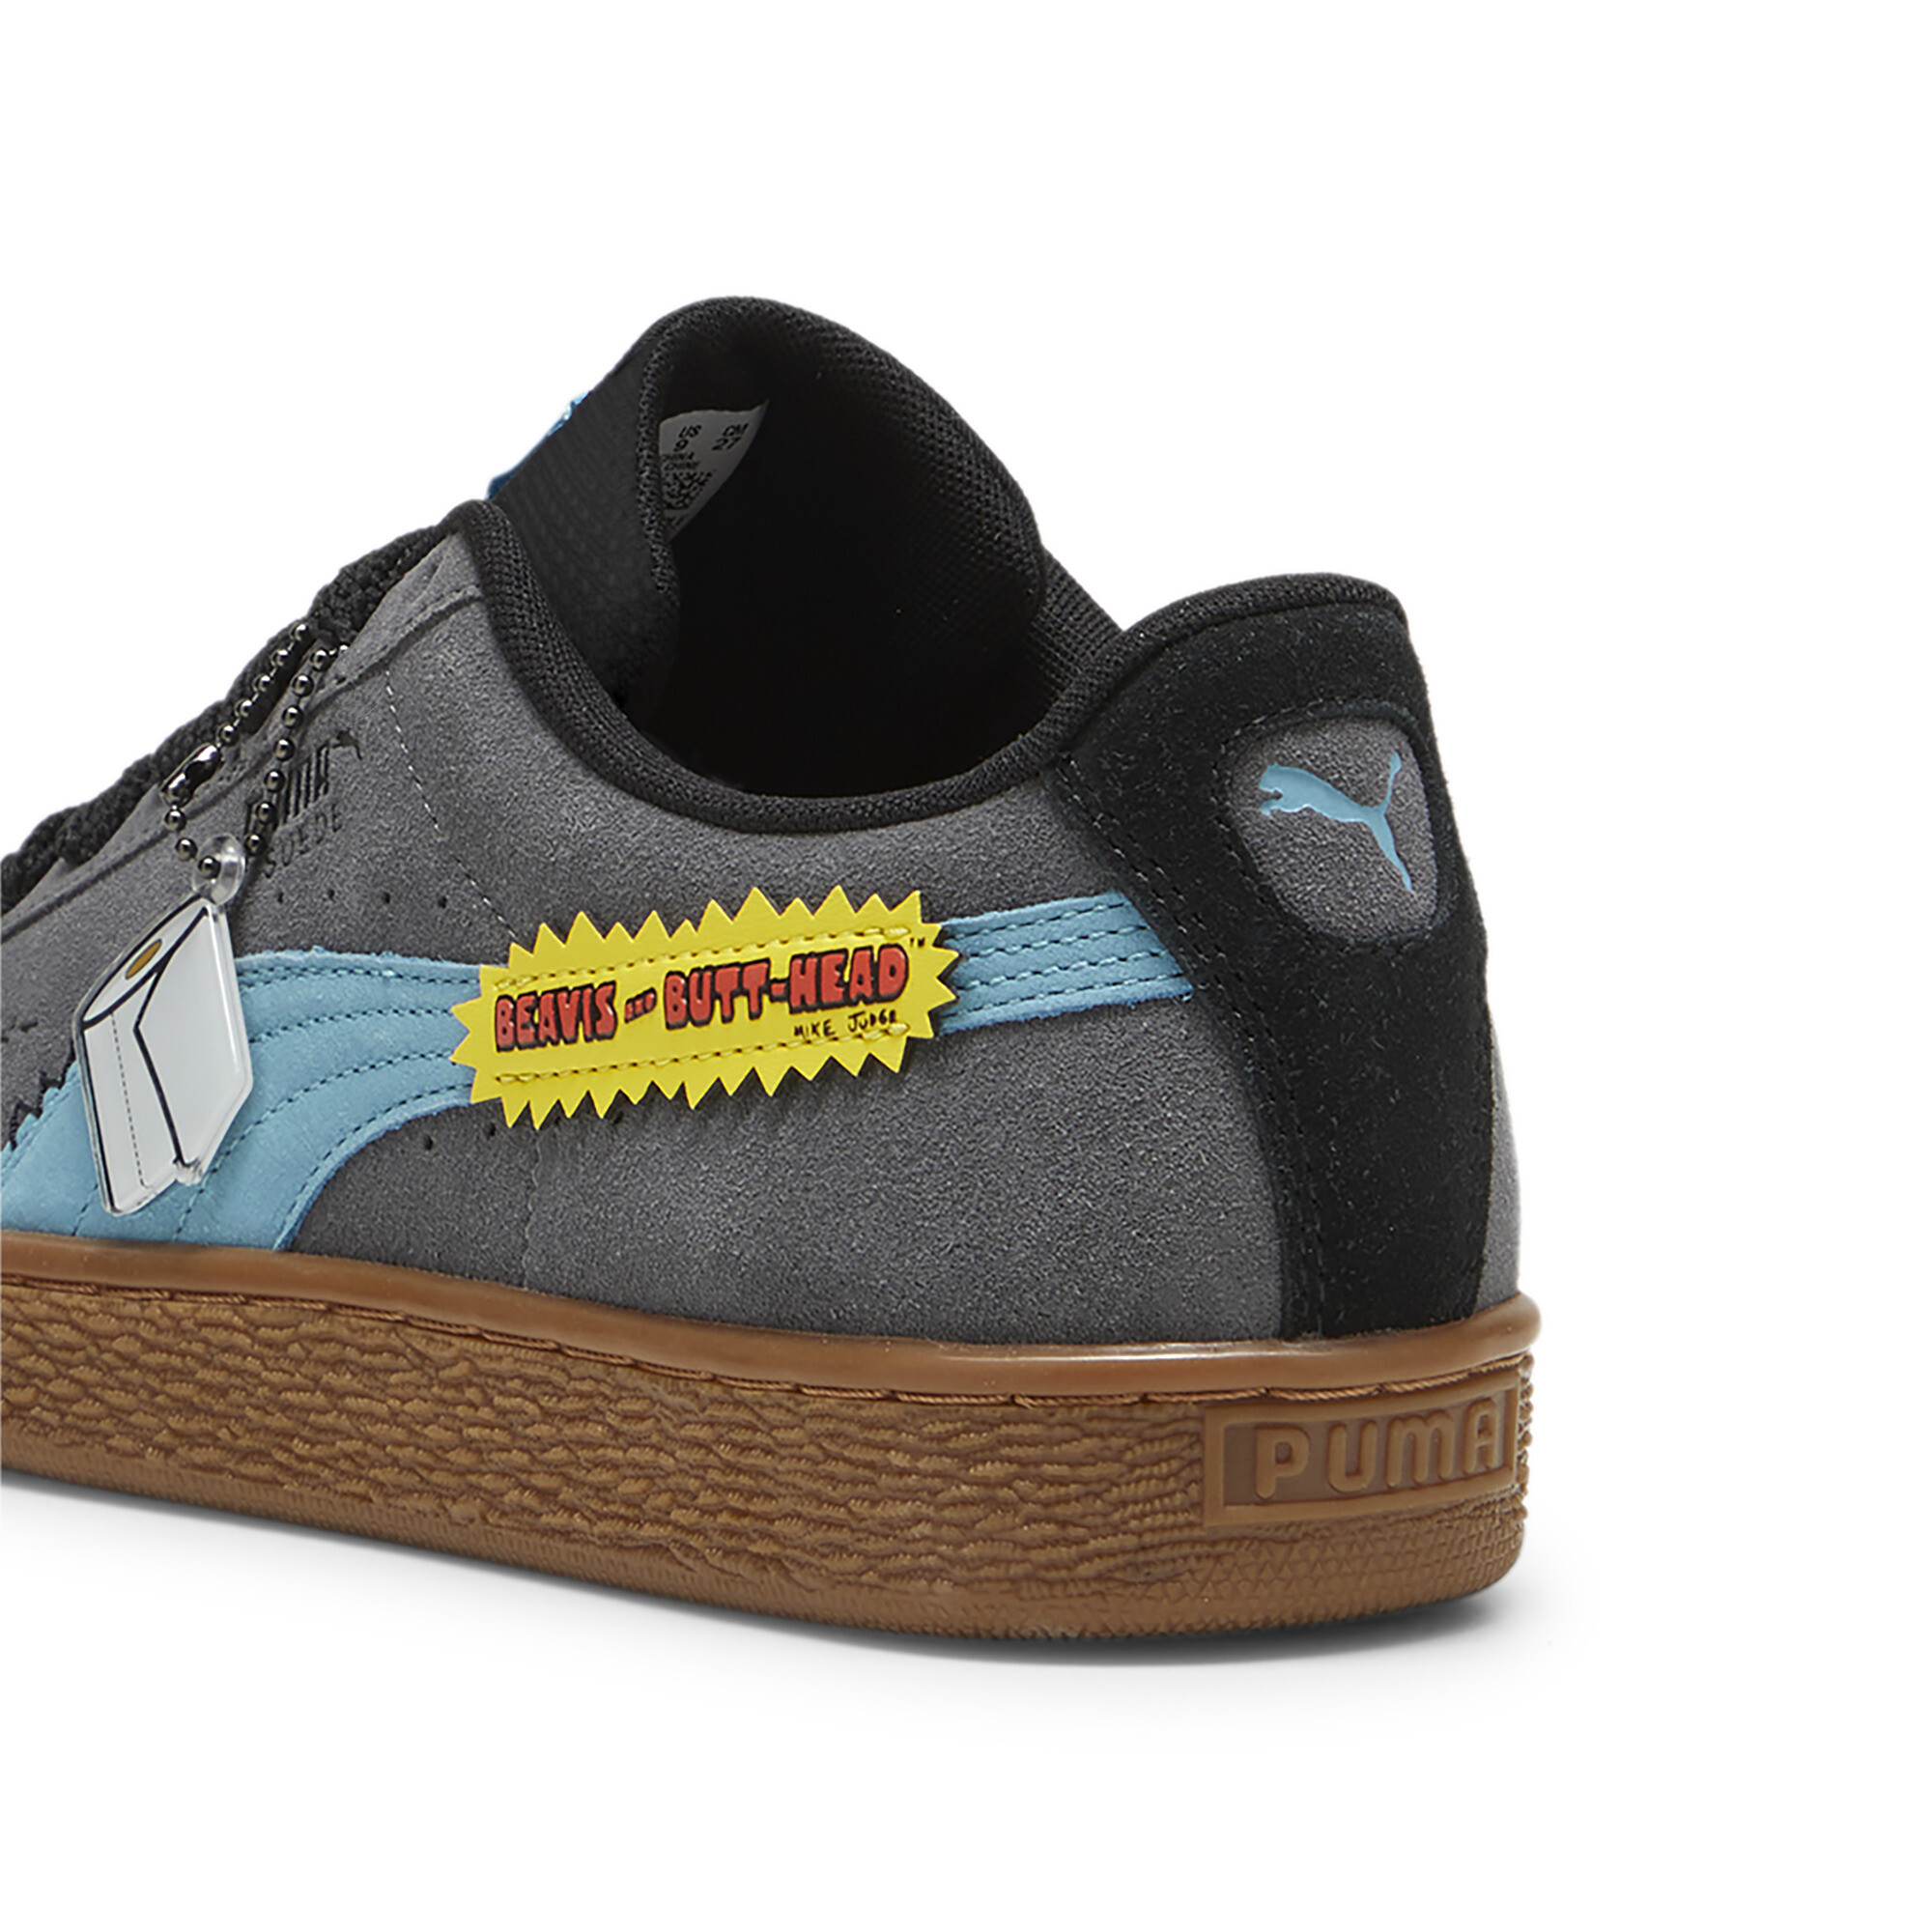 Men's Puma X BEAVIS AND BUTTHEAD Suede Sneakers, Gray, Size 37, Shoes